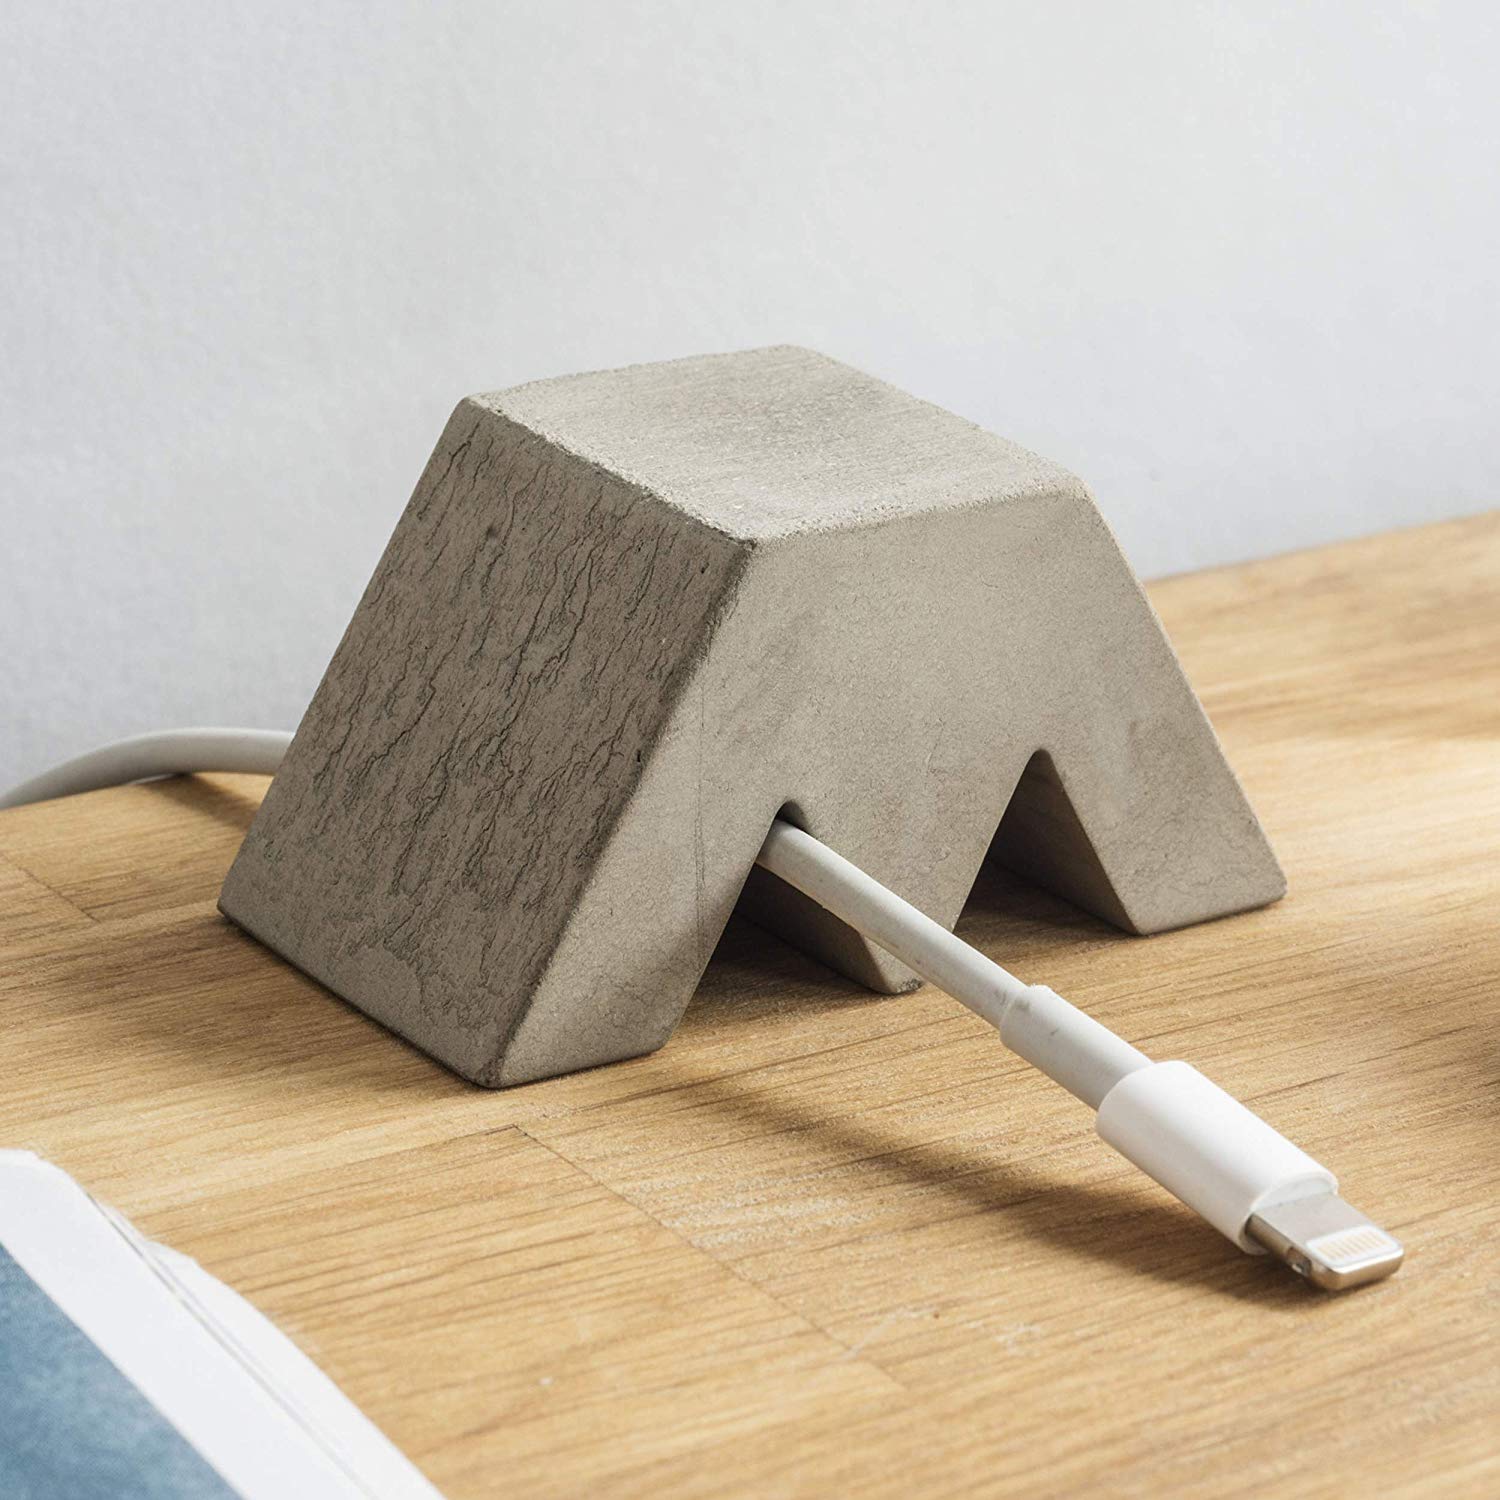 10 Cool, Must-Have Desk Accessories to Help Organize and Inspire Your  Office Workspace - Bestar